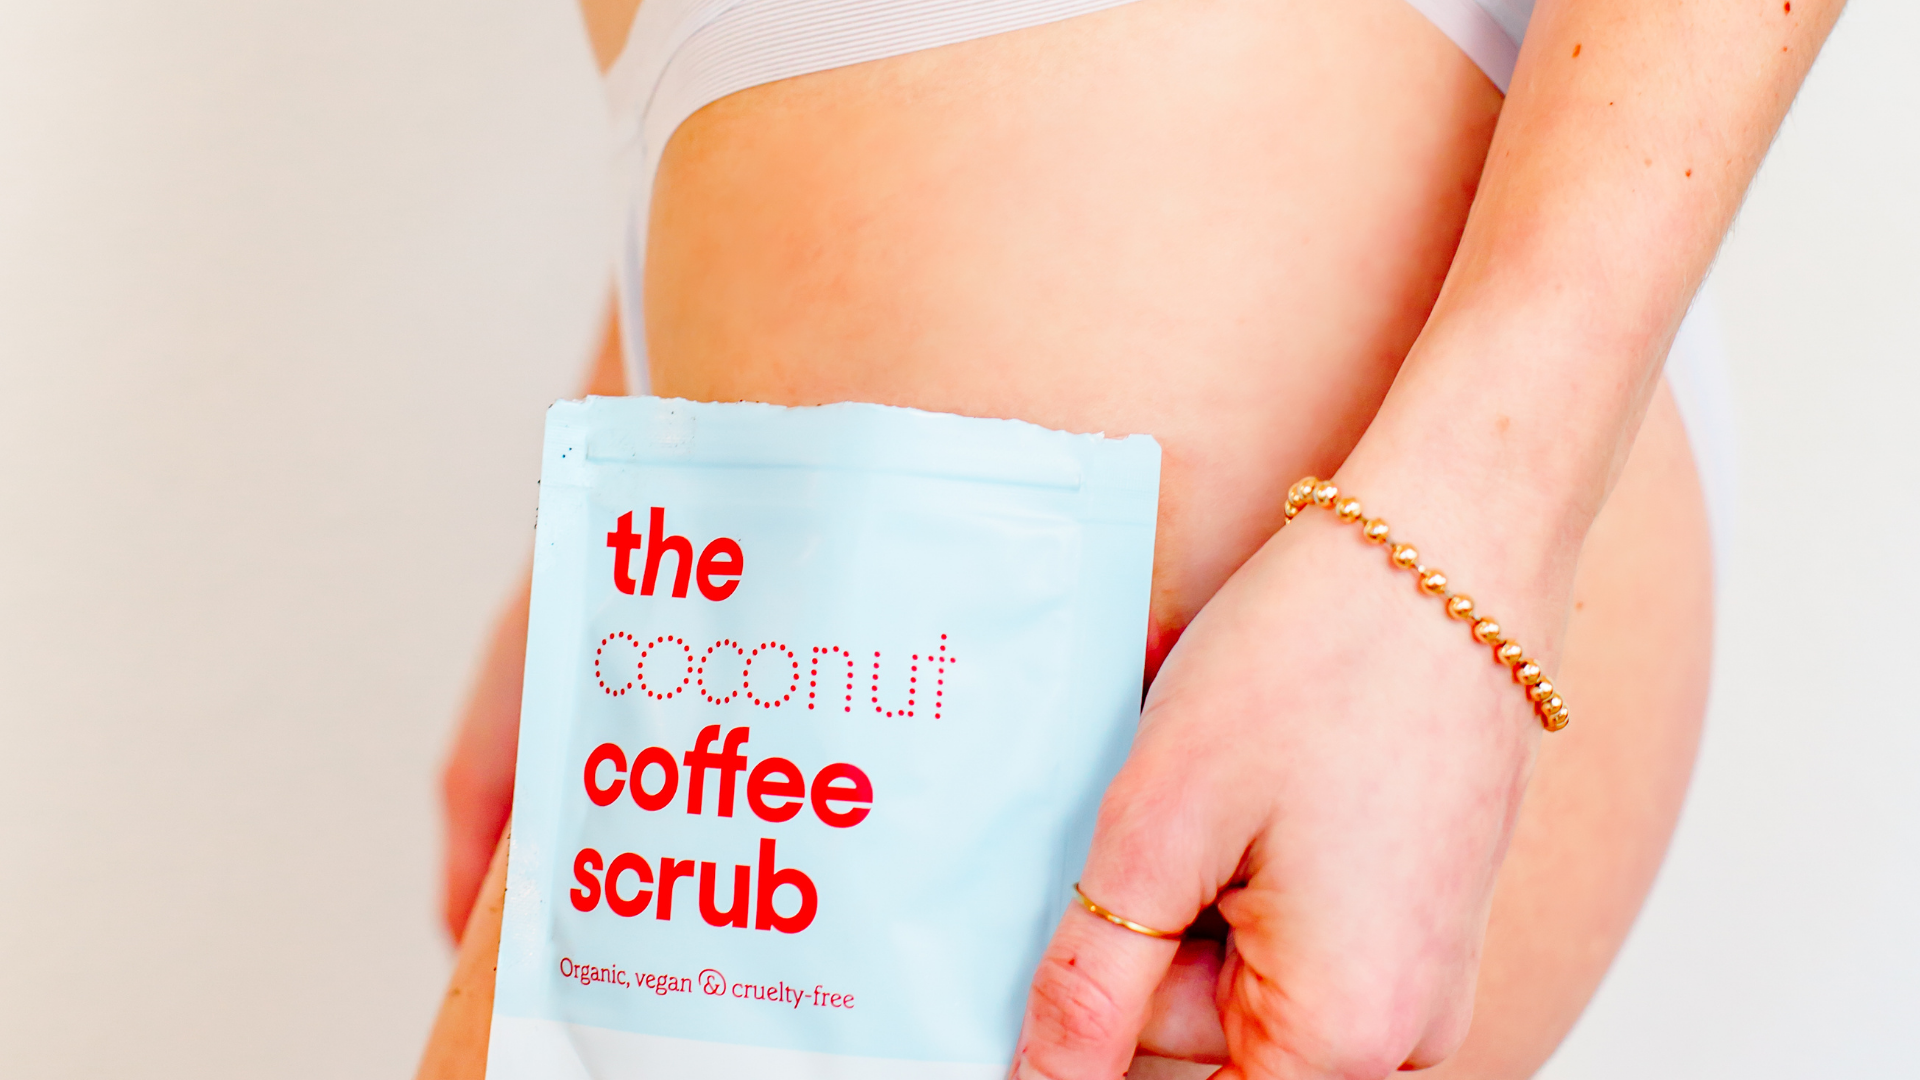 The Benefits of a Coffee Scrub on Cellulite